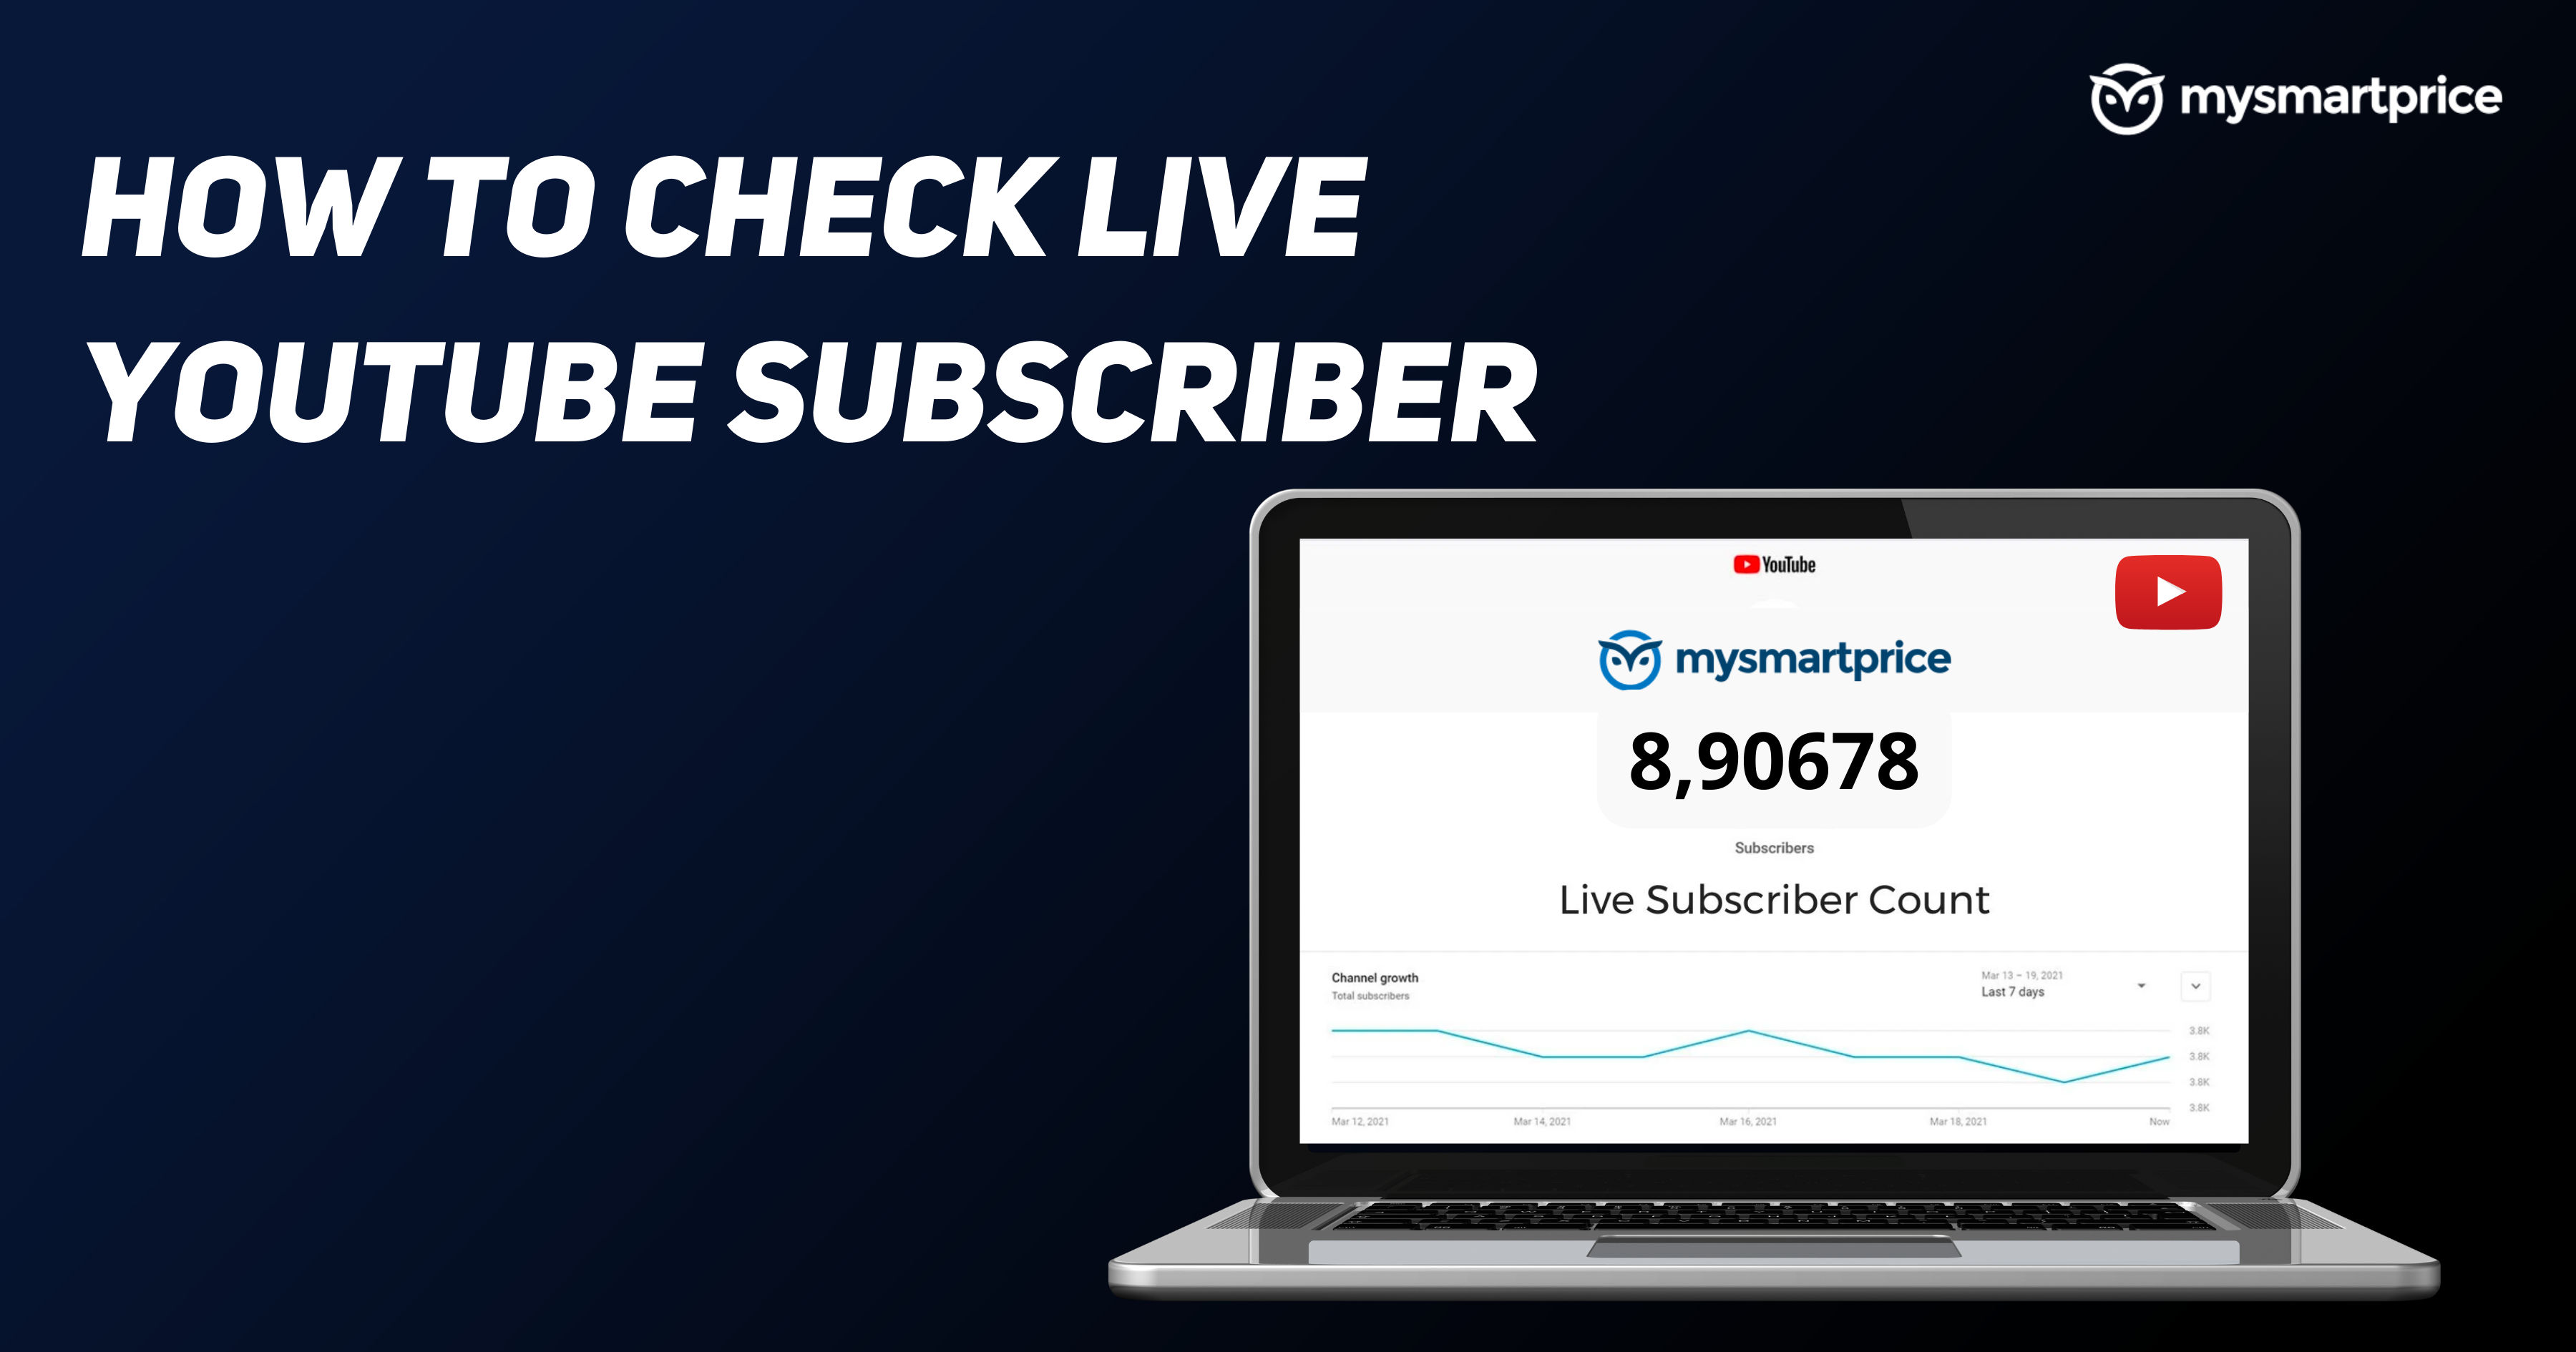 Live Subscriber Count: How to Check Live